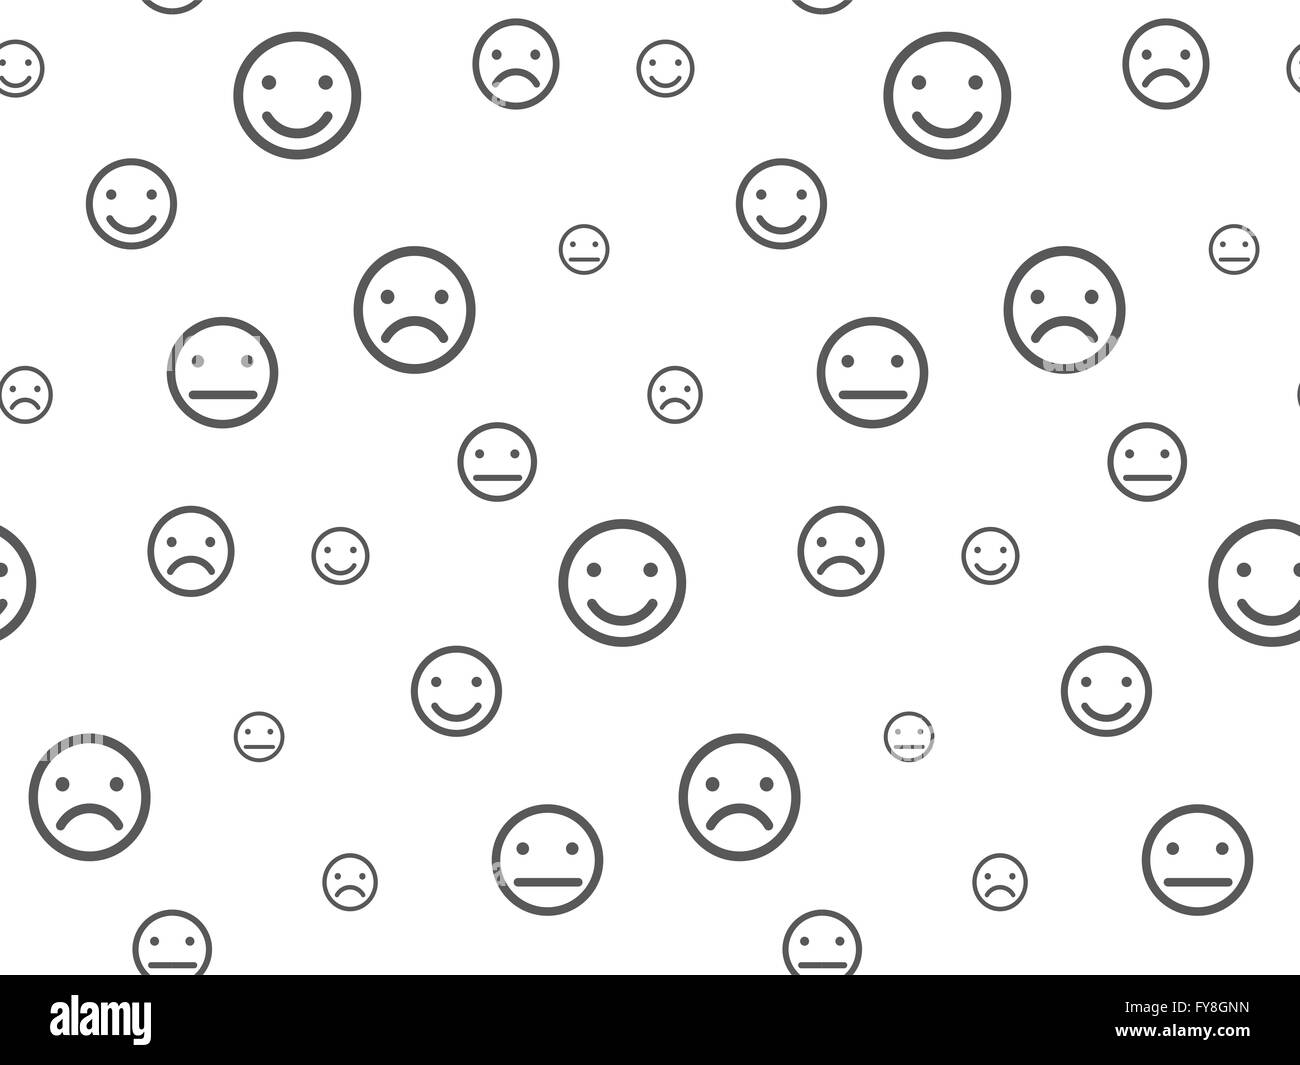 smiley-faces-seamless-pattern-vector-illustration-stock-vector-image